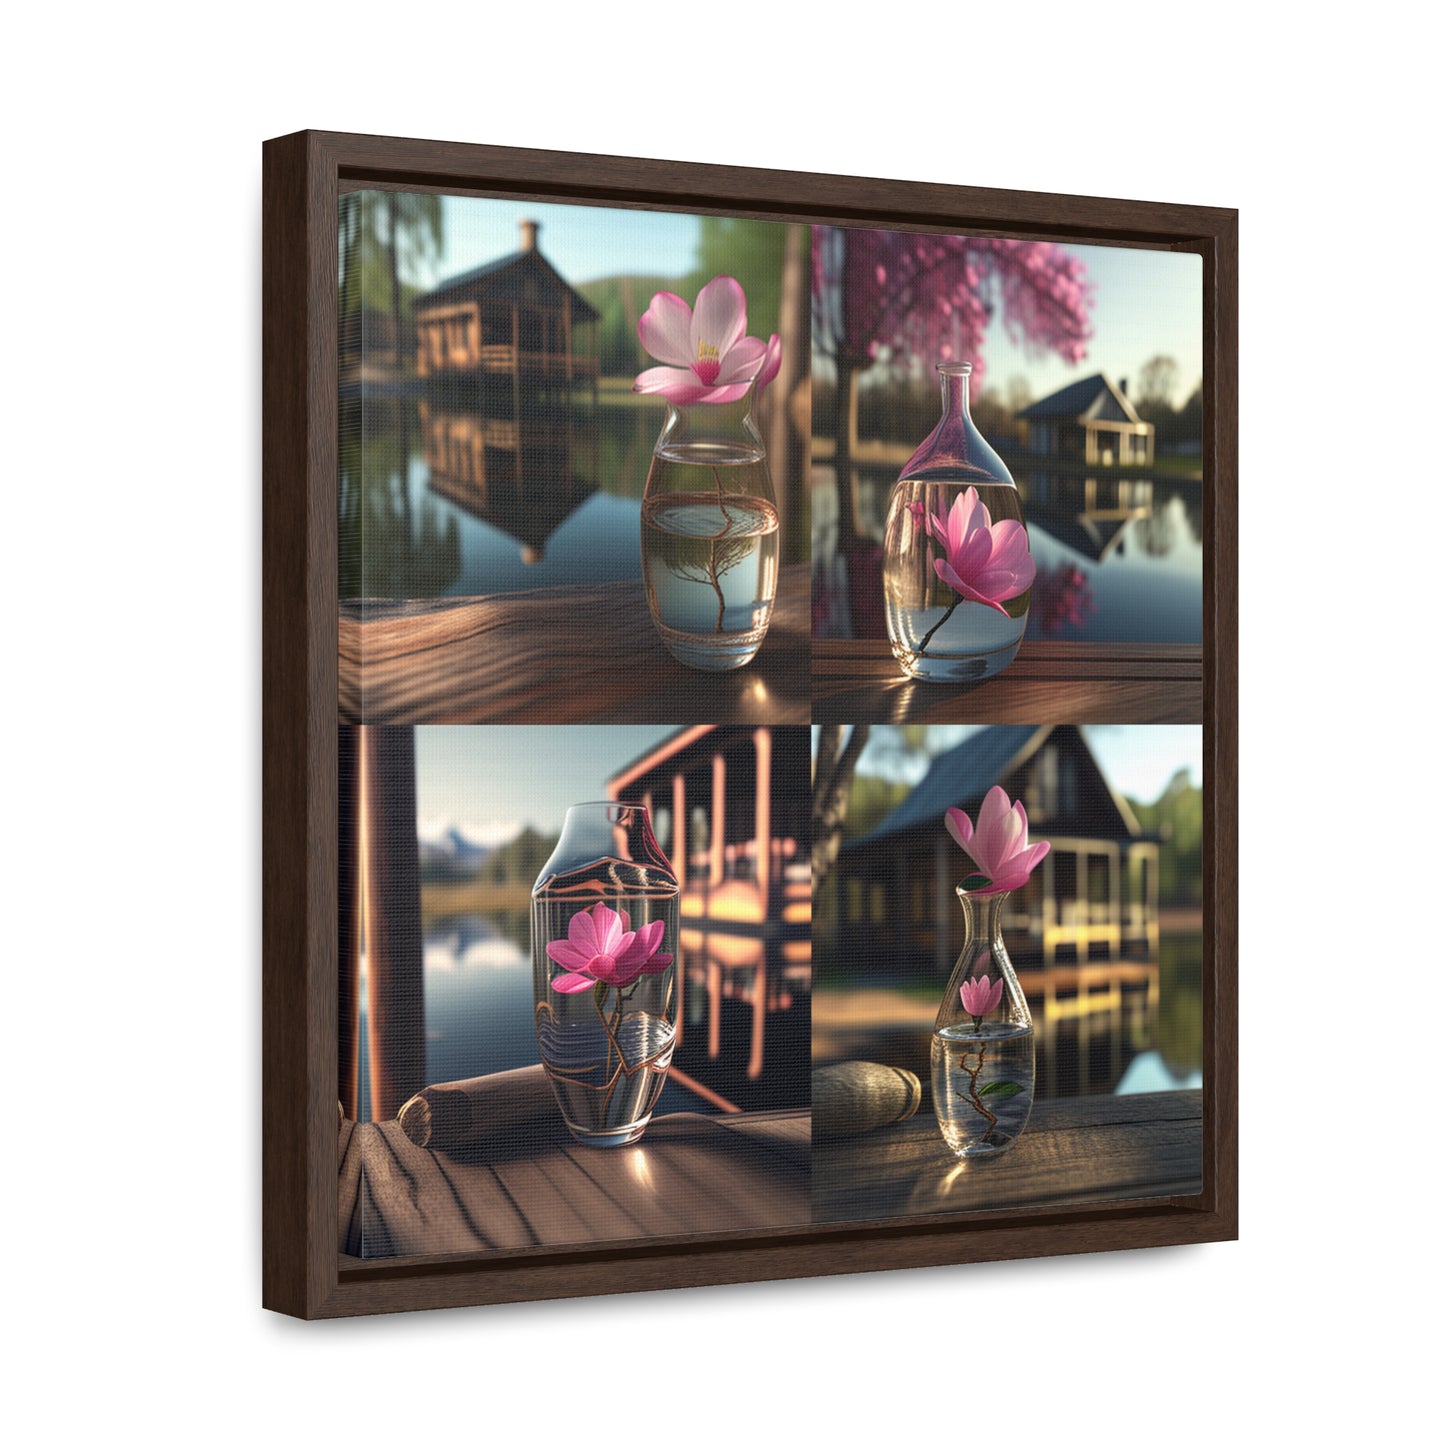 Gallery Canvas Wraps, Square Frame Magnolia in a Glass vase 5